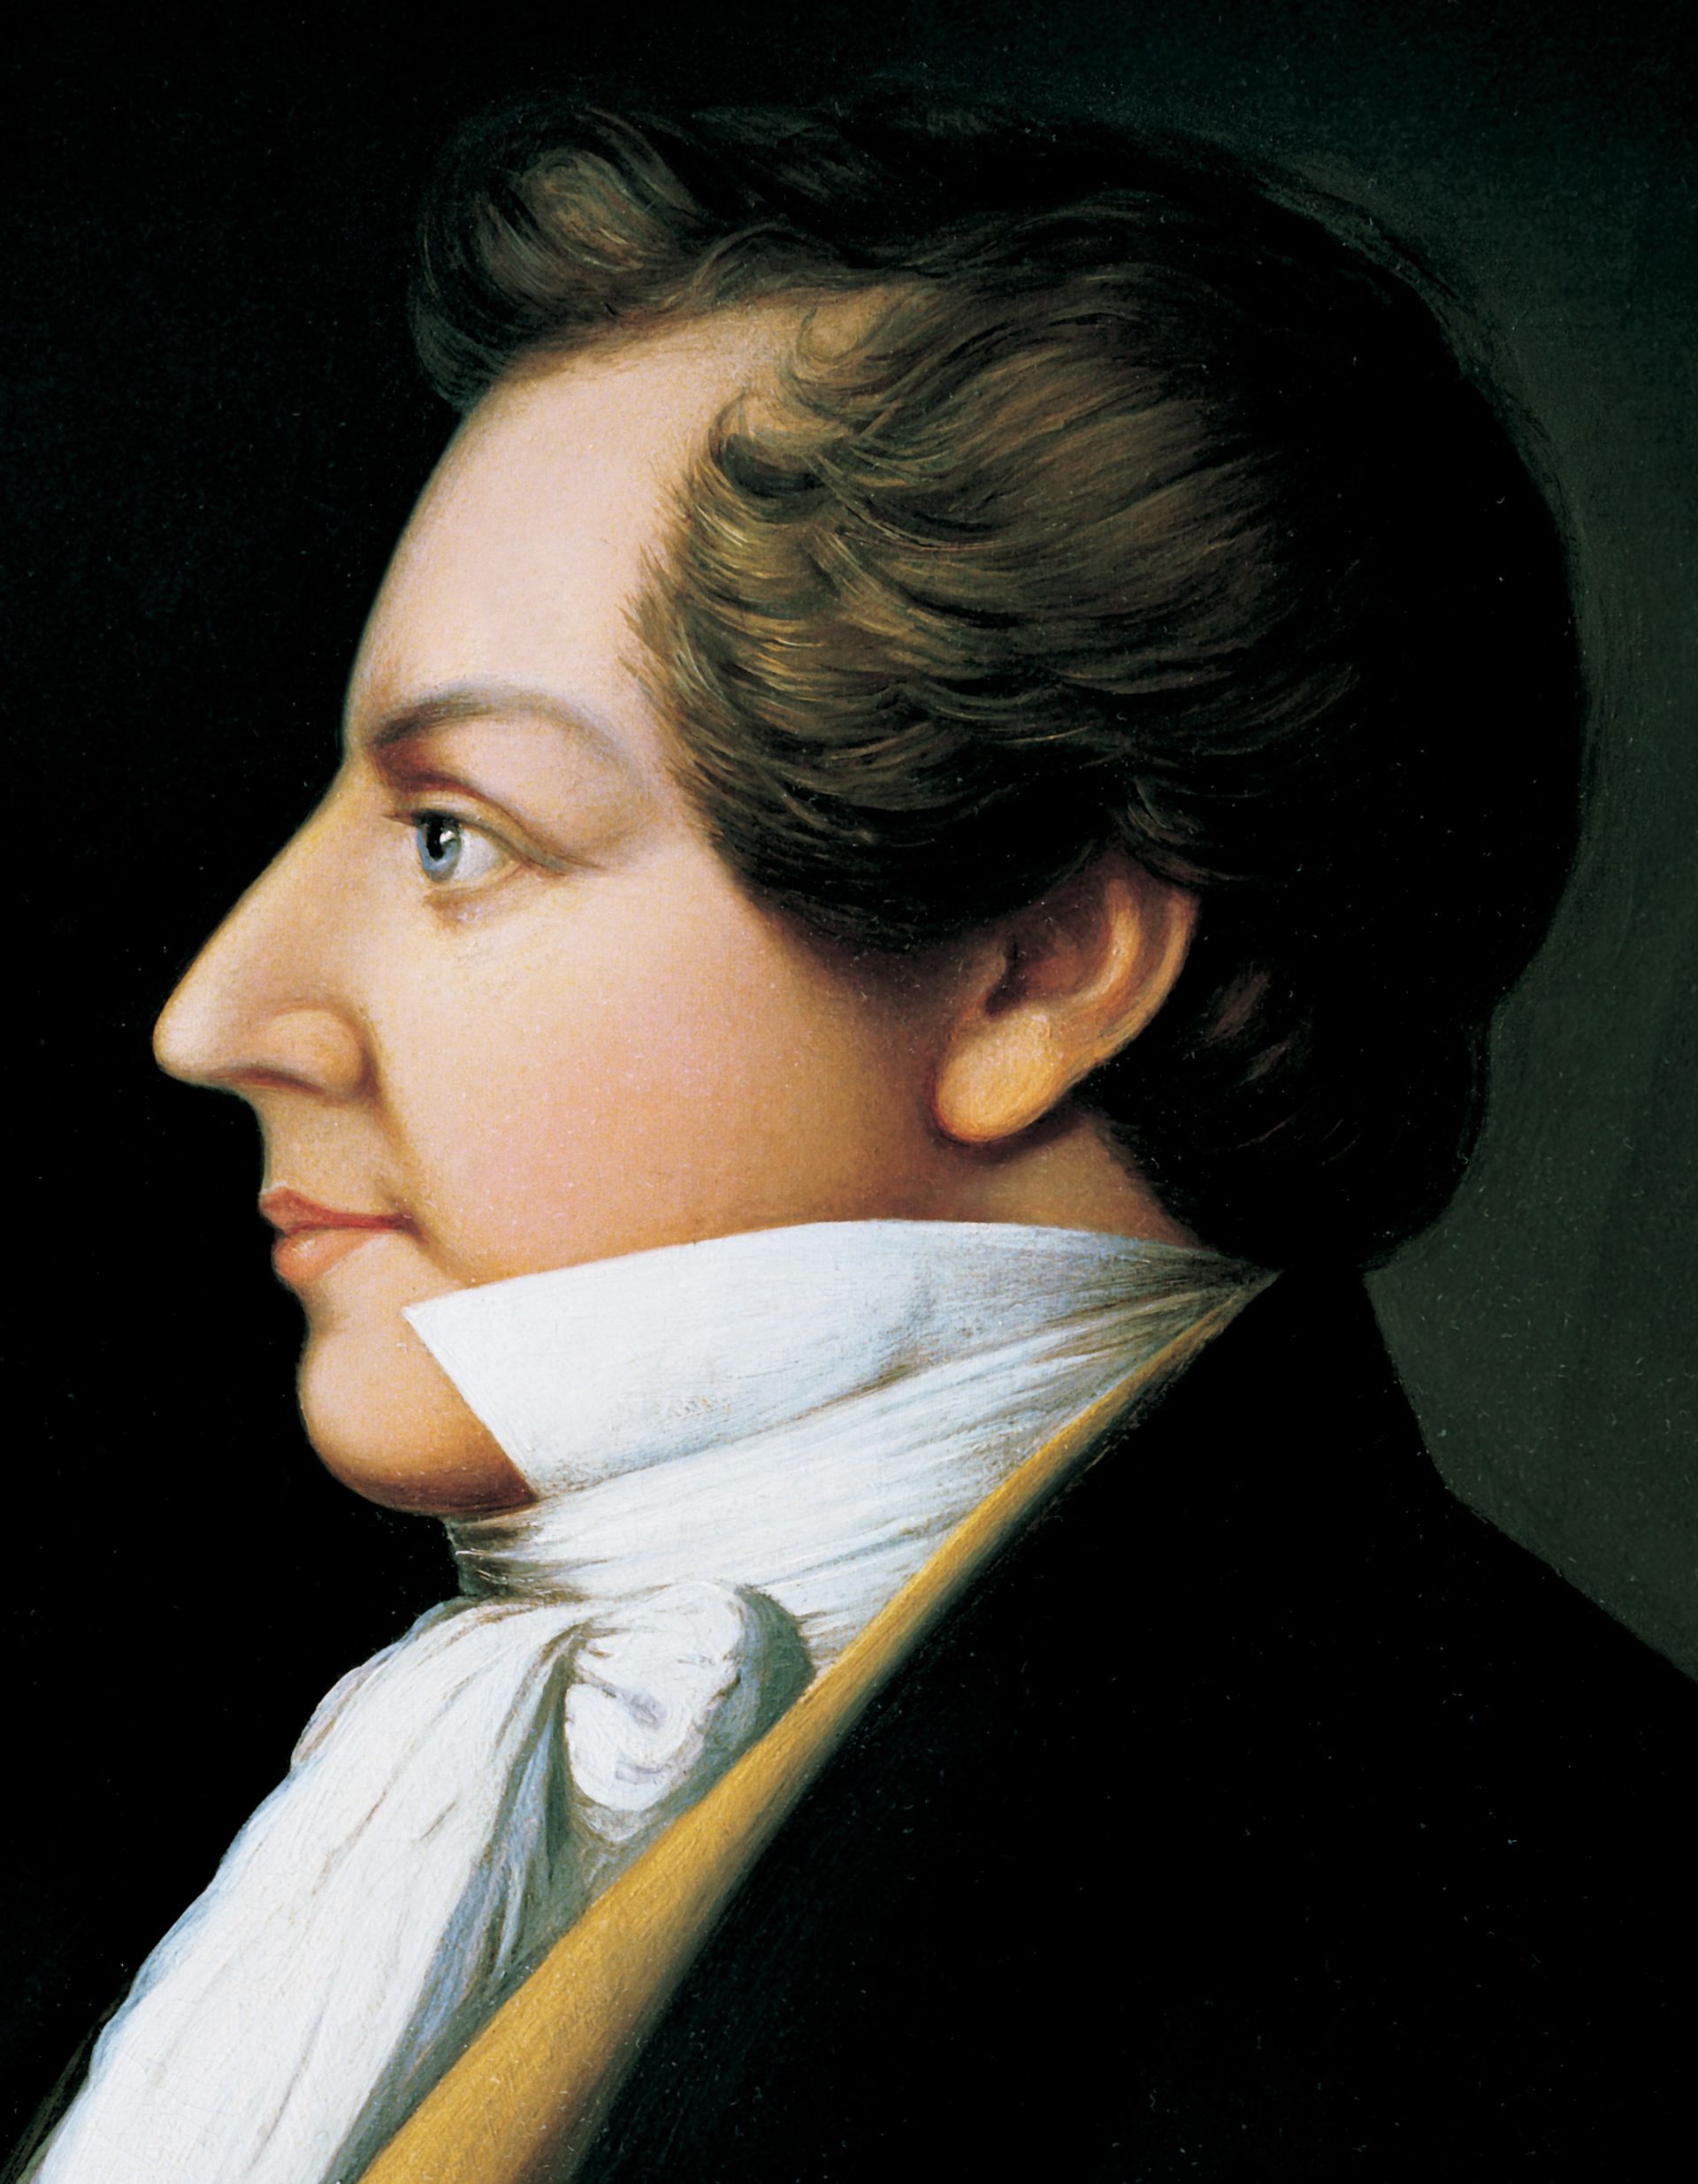 A portrait of Joseph Smith Jr., who was the first President of The Church of Jesus Christ of Latter-day Saints from 1830 to 1844; painted by Danquart Anthon Weggeland.